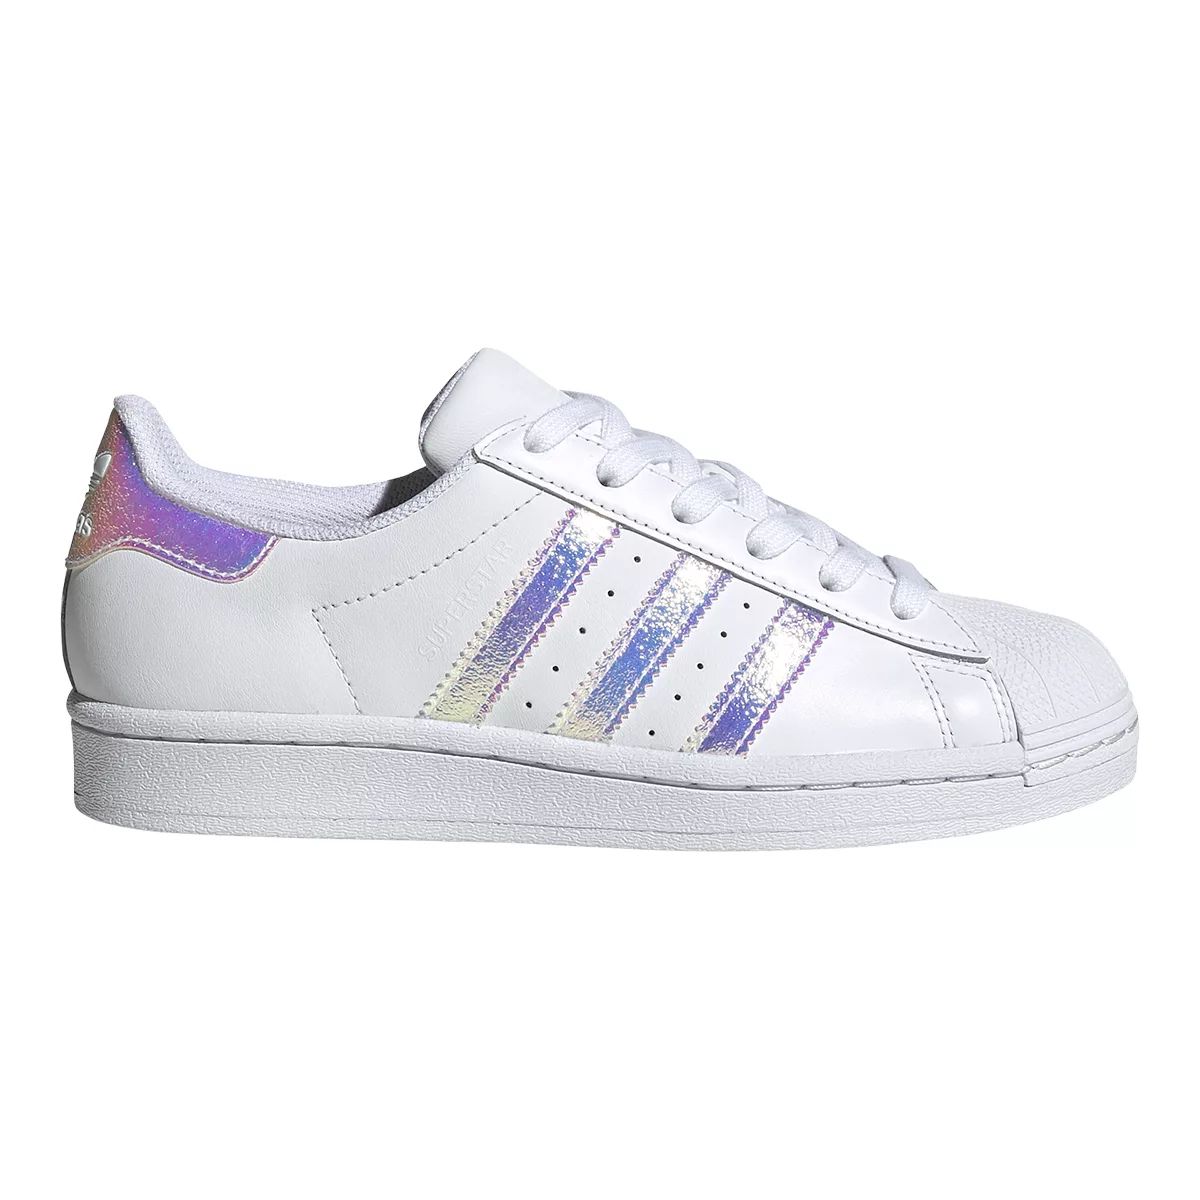 ADIDAS Superstar Crystals Girls Shoes - WHITE | Tillys